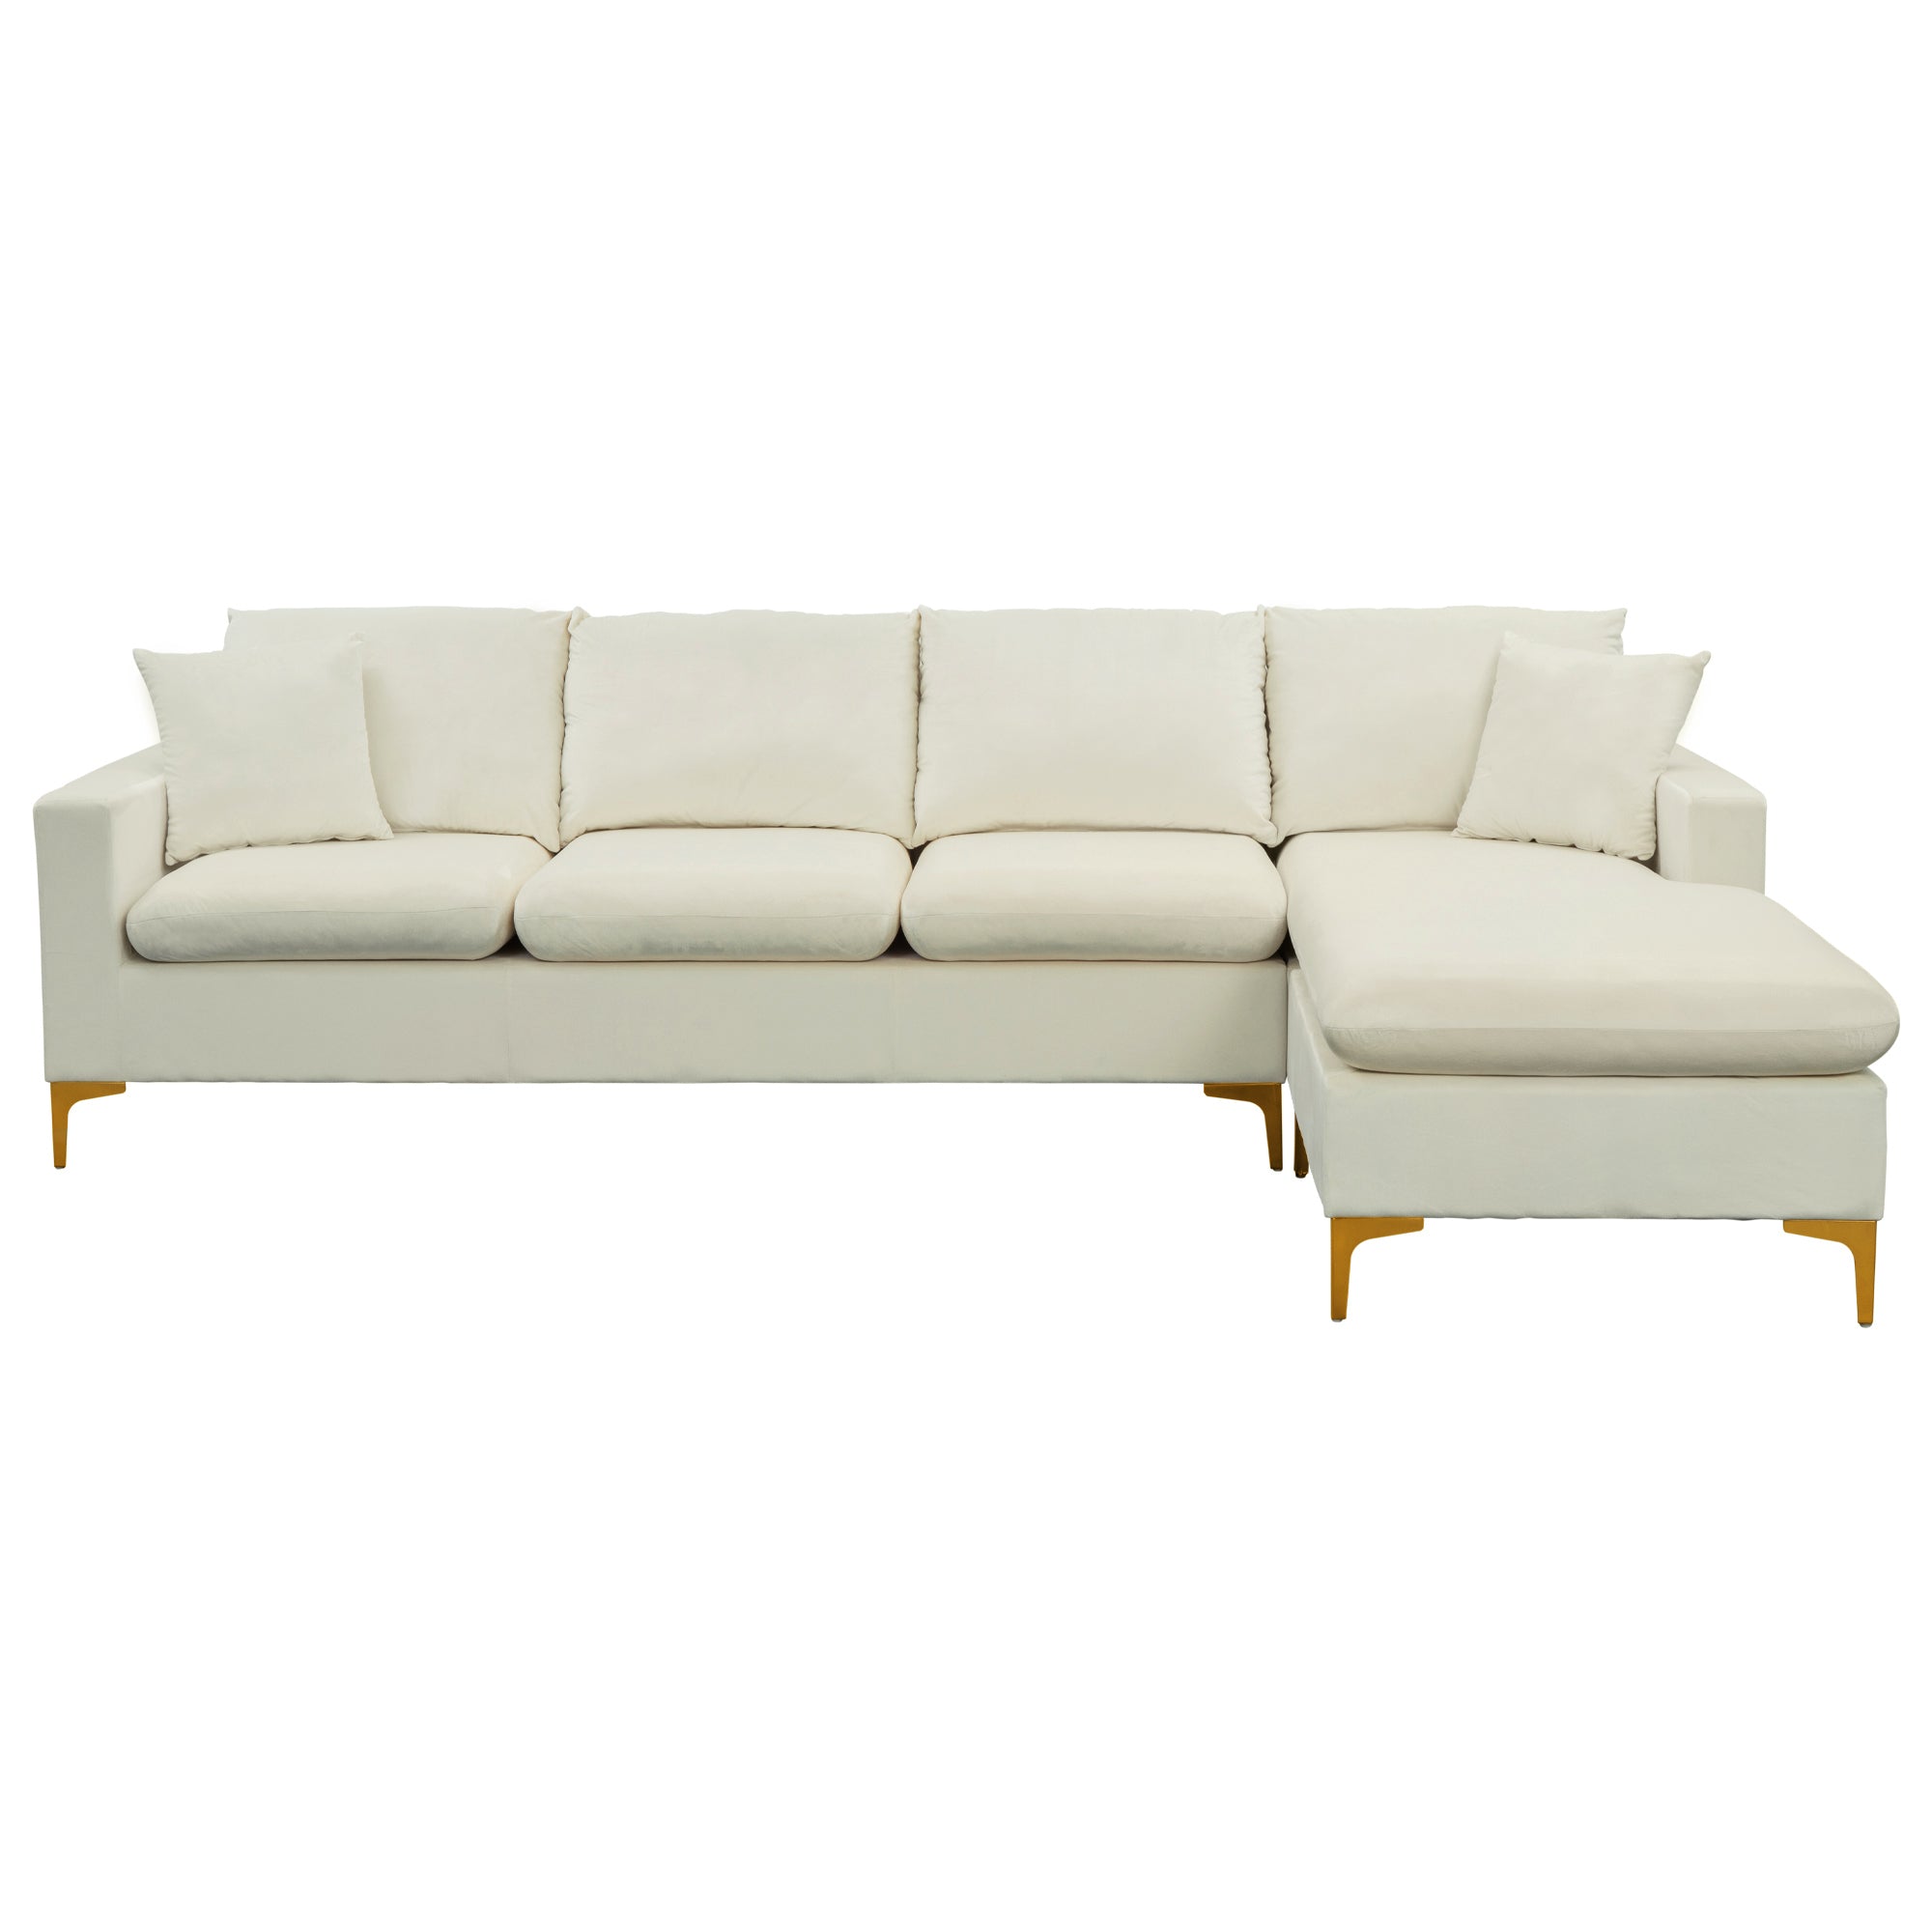 Sofa Bed Couches Chaise Ottoman Pillows